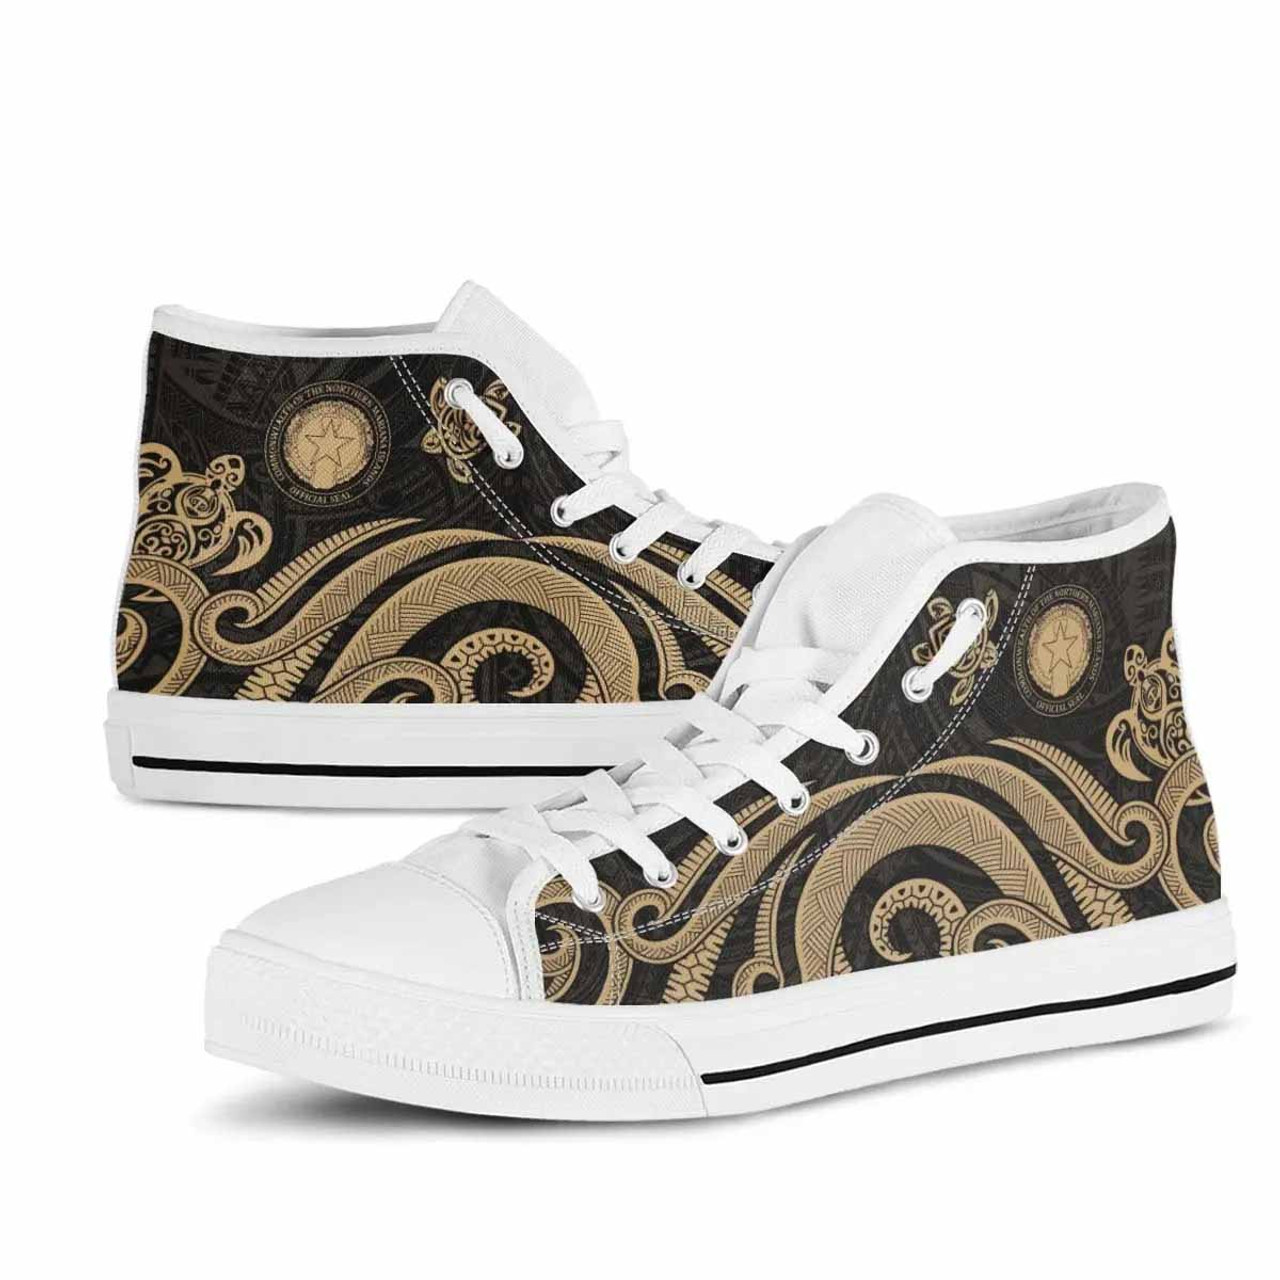 Northern Mariana Islands High Top Shoes - Gold Tentacle Turtle 6